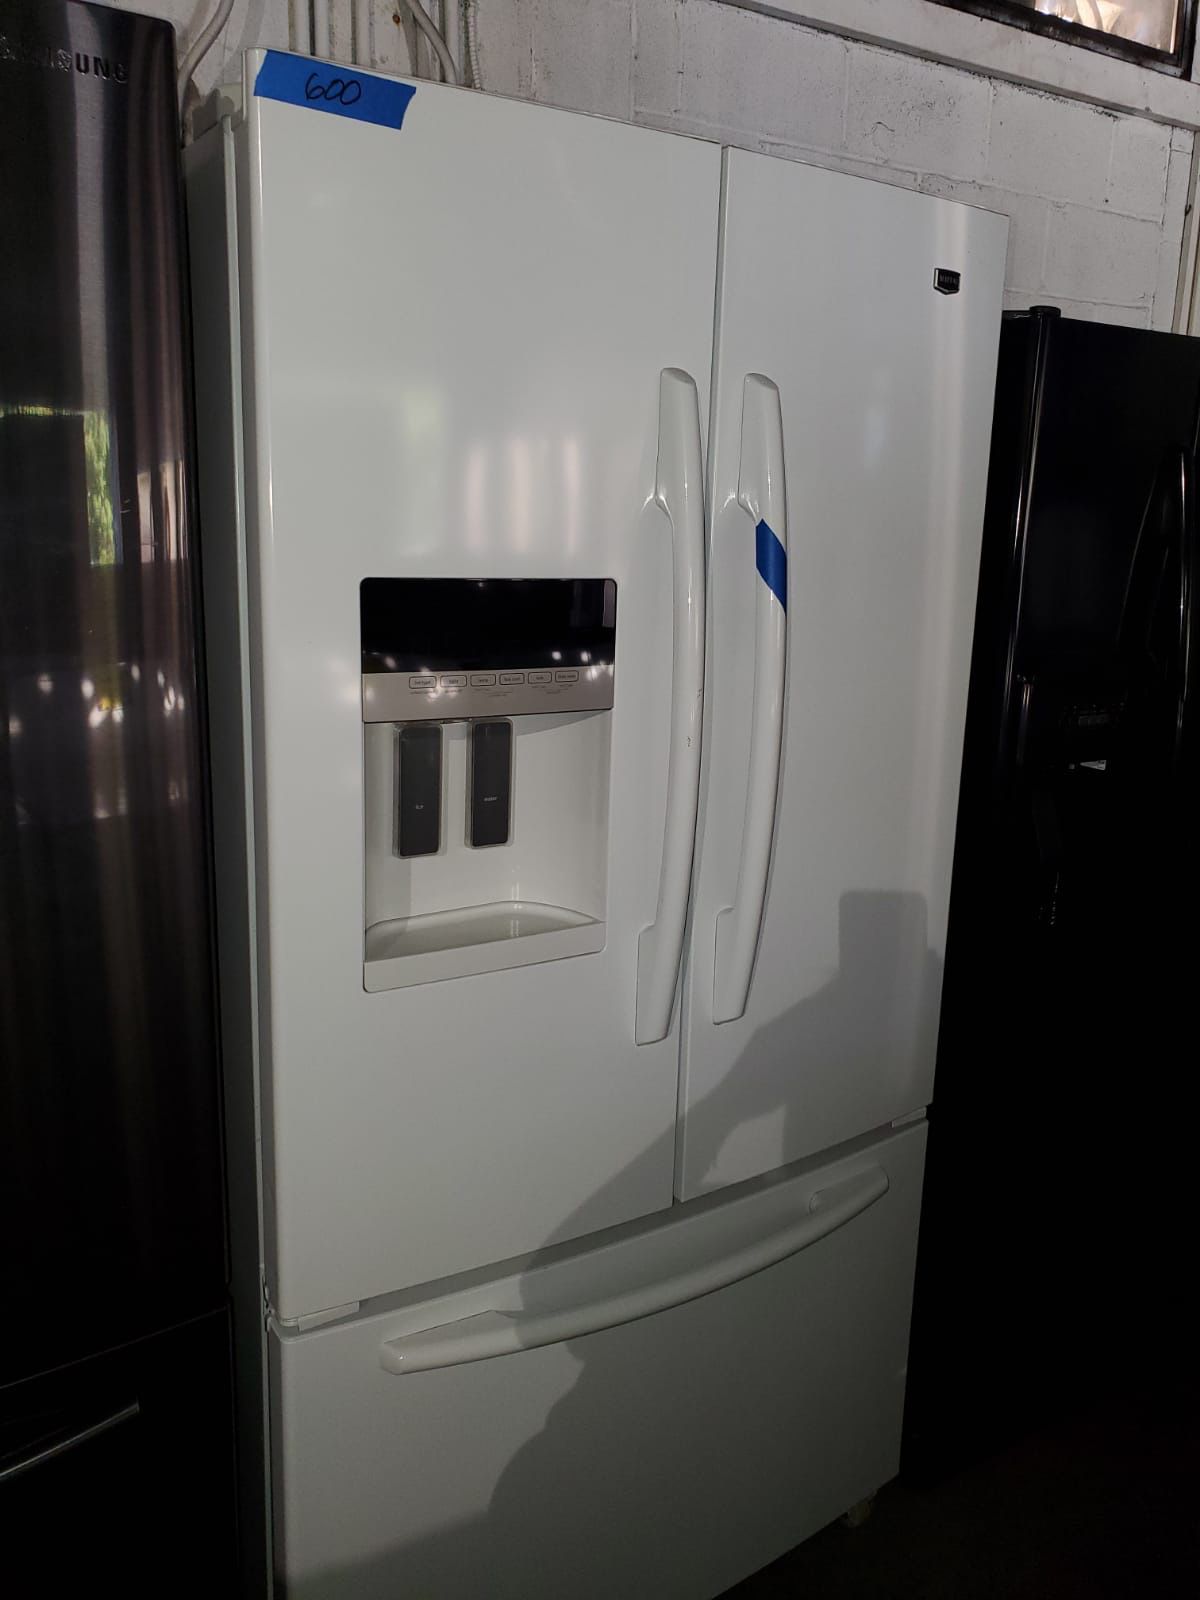 MAYTAG 36in. French doors refrigerator working perfectly with 4 months warranty